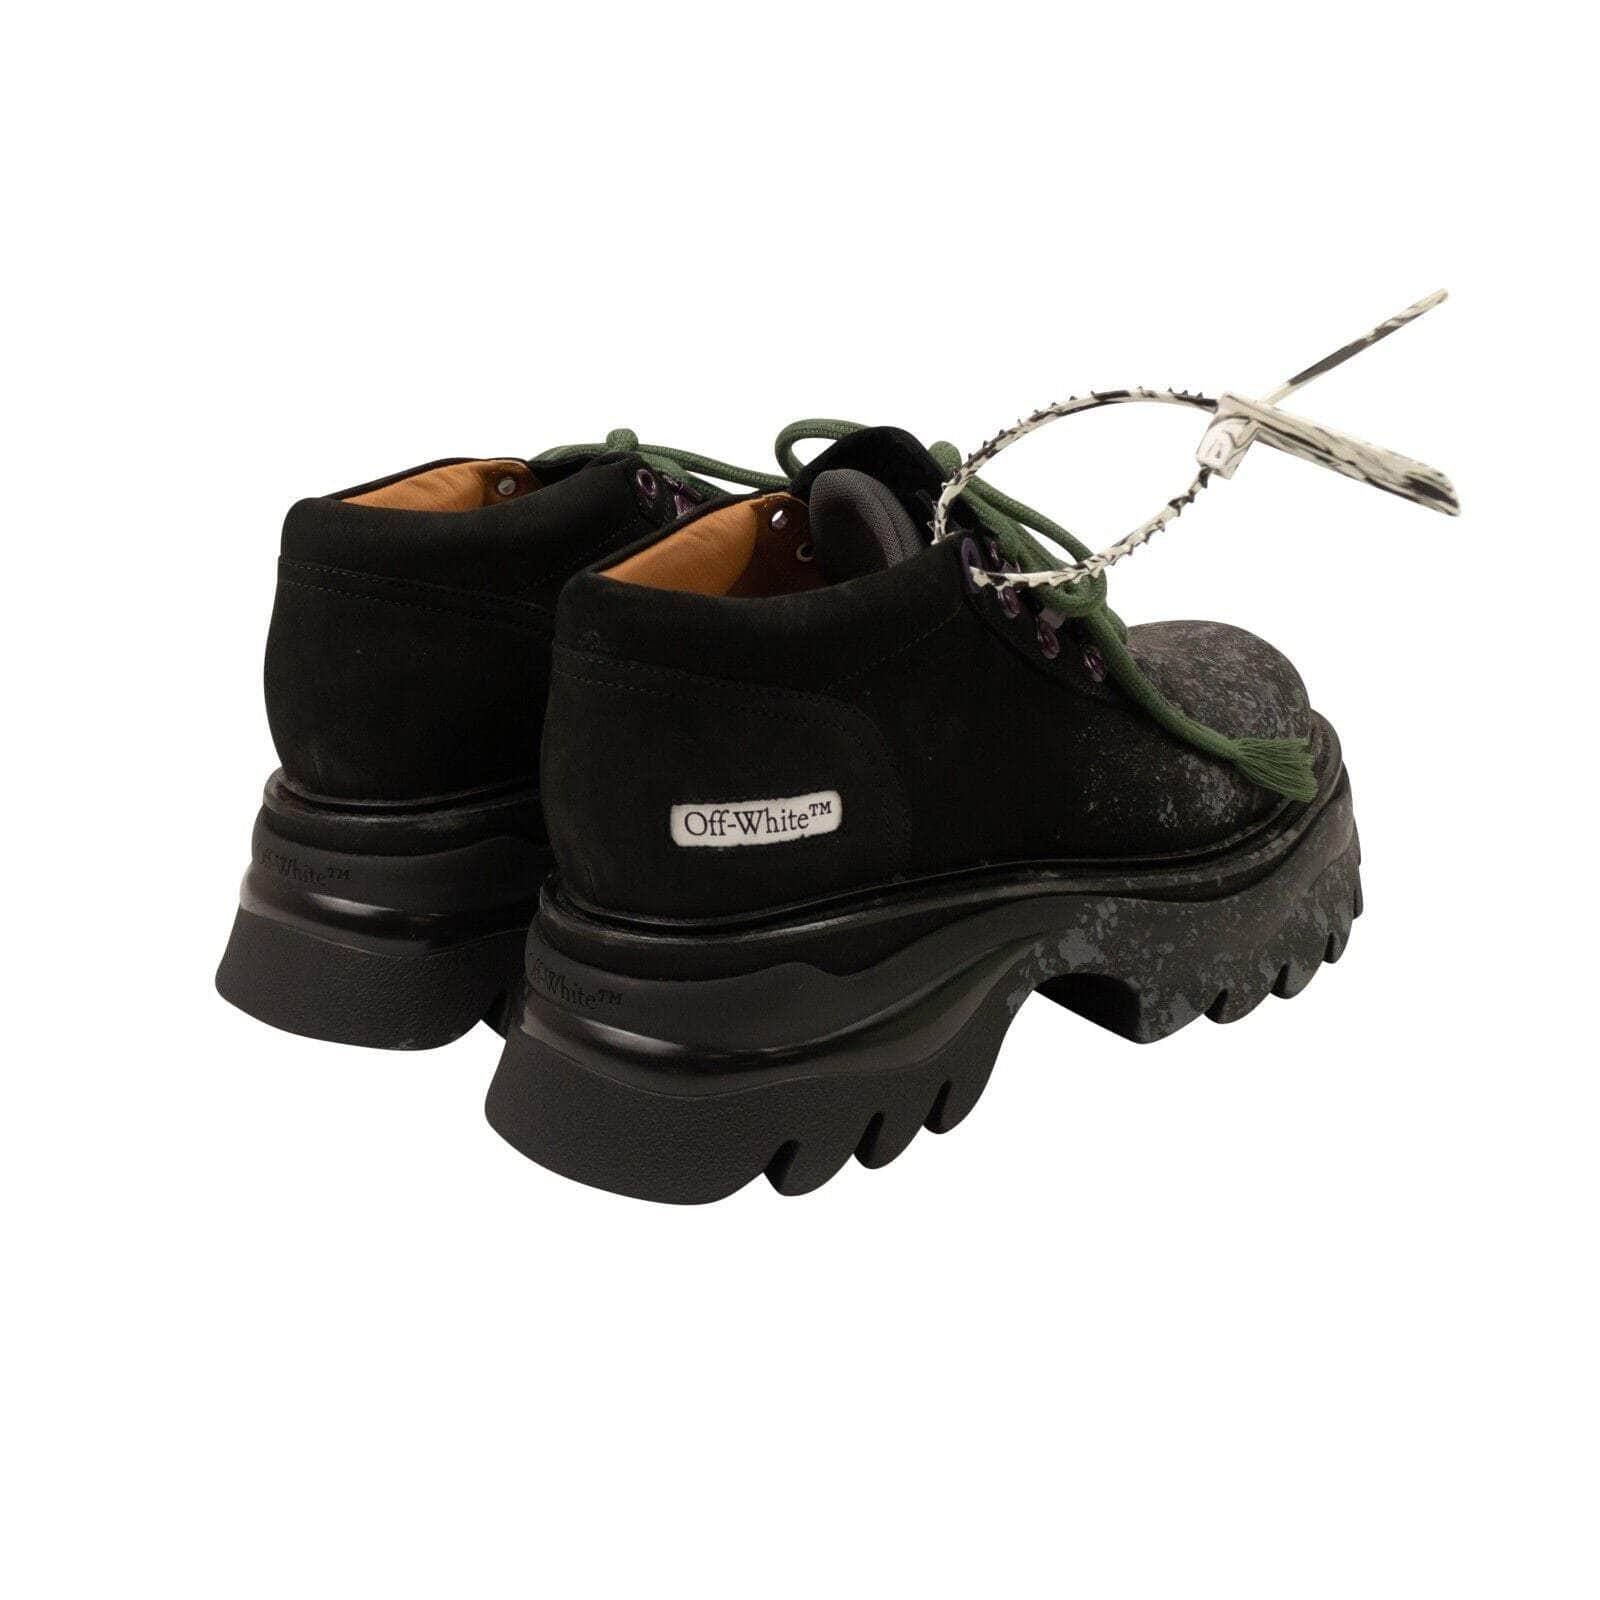 Off-White c/o Virgil Abloh 750-1000, channelenable-all, chicmi, couponcollection, gender-mens, main-shoes, mens-ankle-boots, mens-shoes, off-white-c-o-virgil-abloh, size-41, size-42 41 Black Chunky Ridged Sole Boot OFW-XFTW-0017/41 OFW-XFTW-0017/41